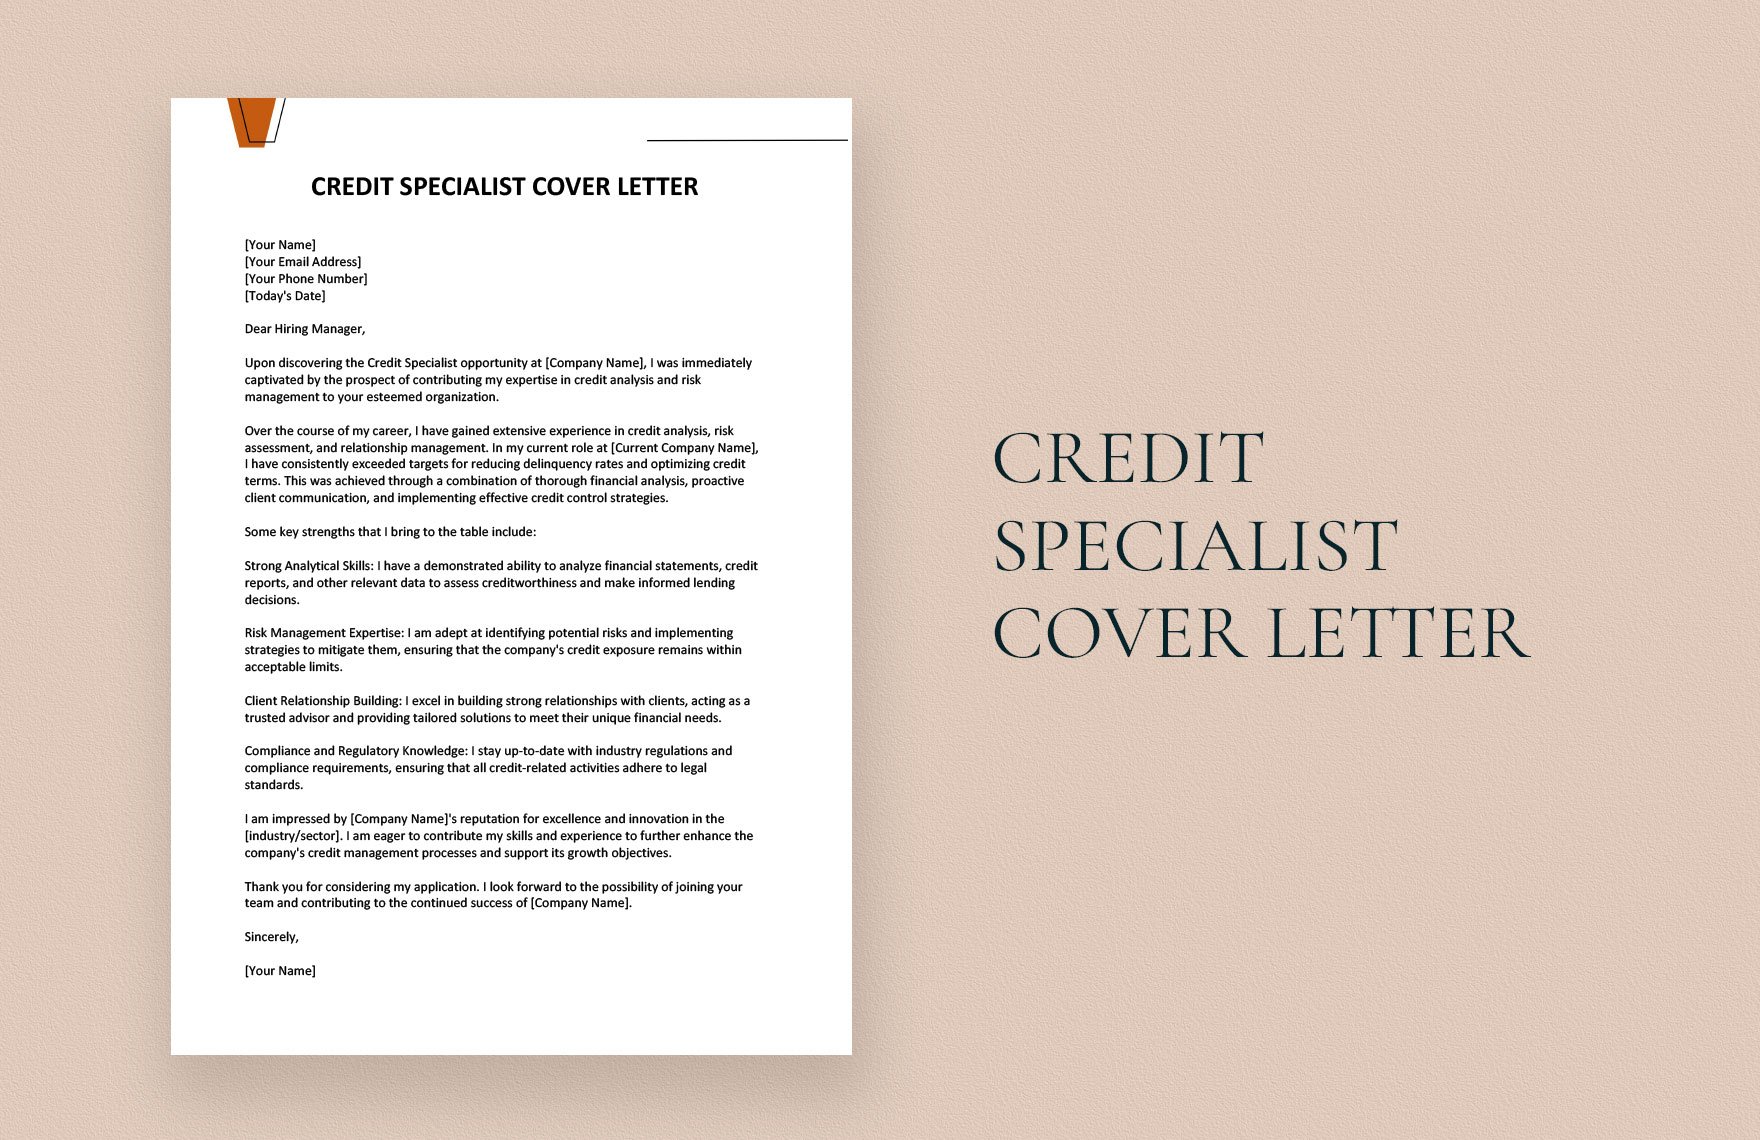 Credit Specialist Cover Letter in Word, Google Docs - Download ...